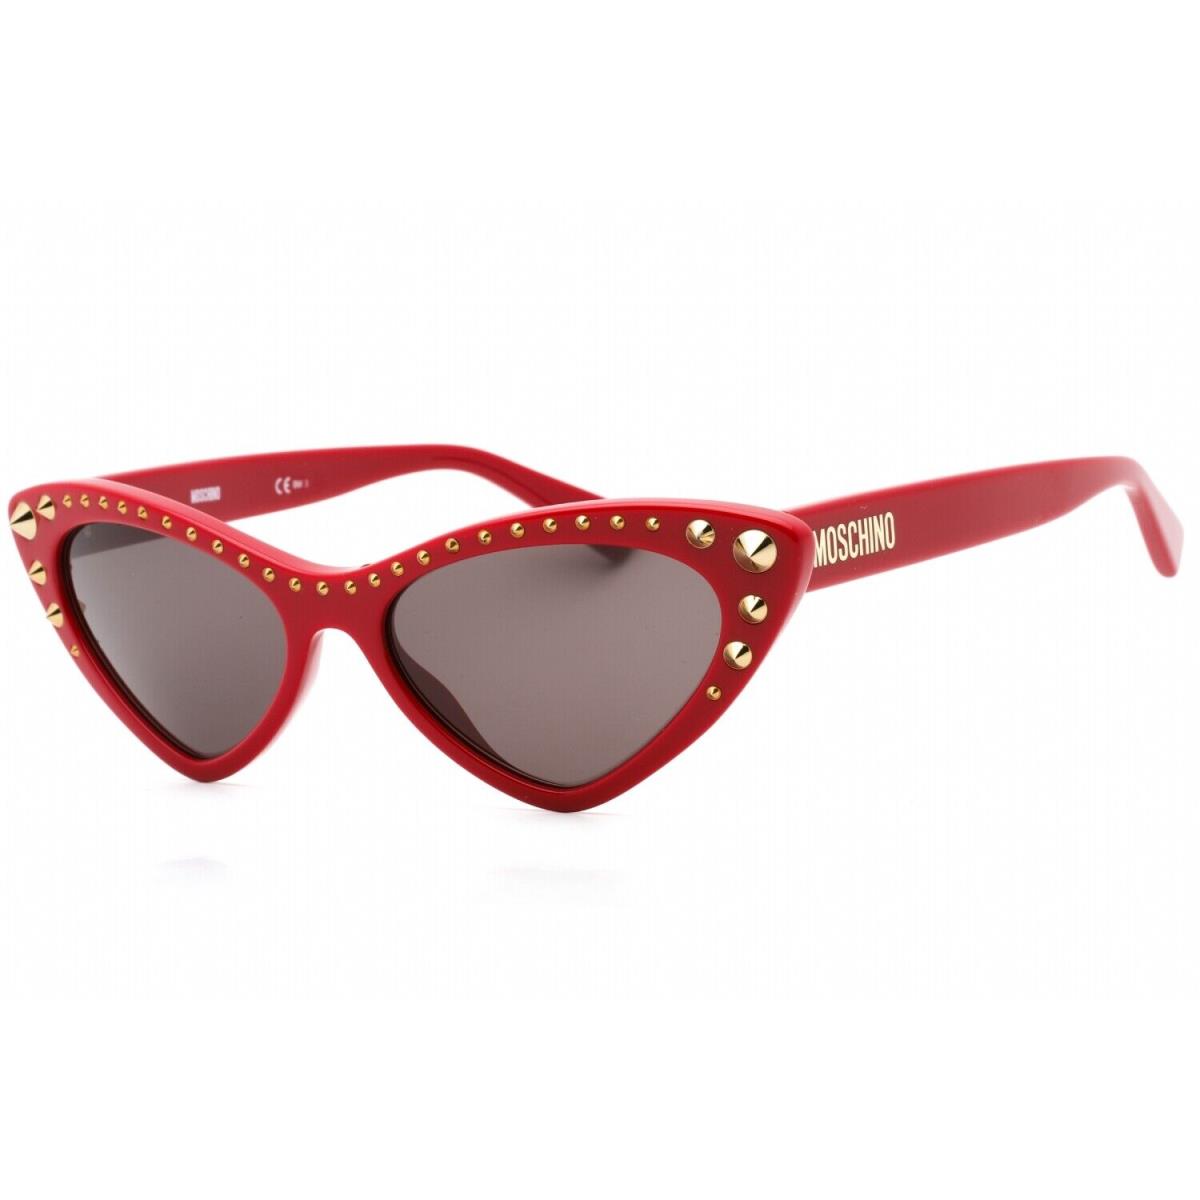 Moschino MOS093S-C9AIR-53 Sunglasses Size 53mm 140mm 17mm Red Women